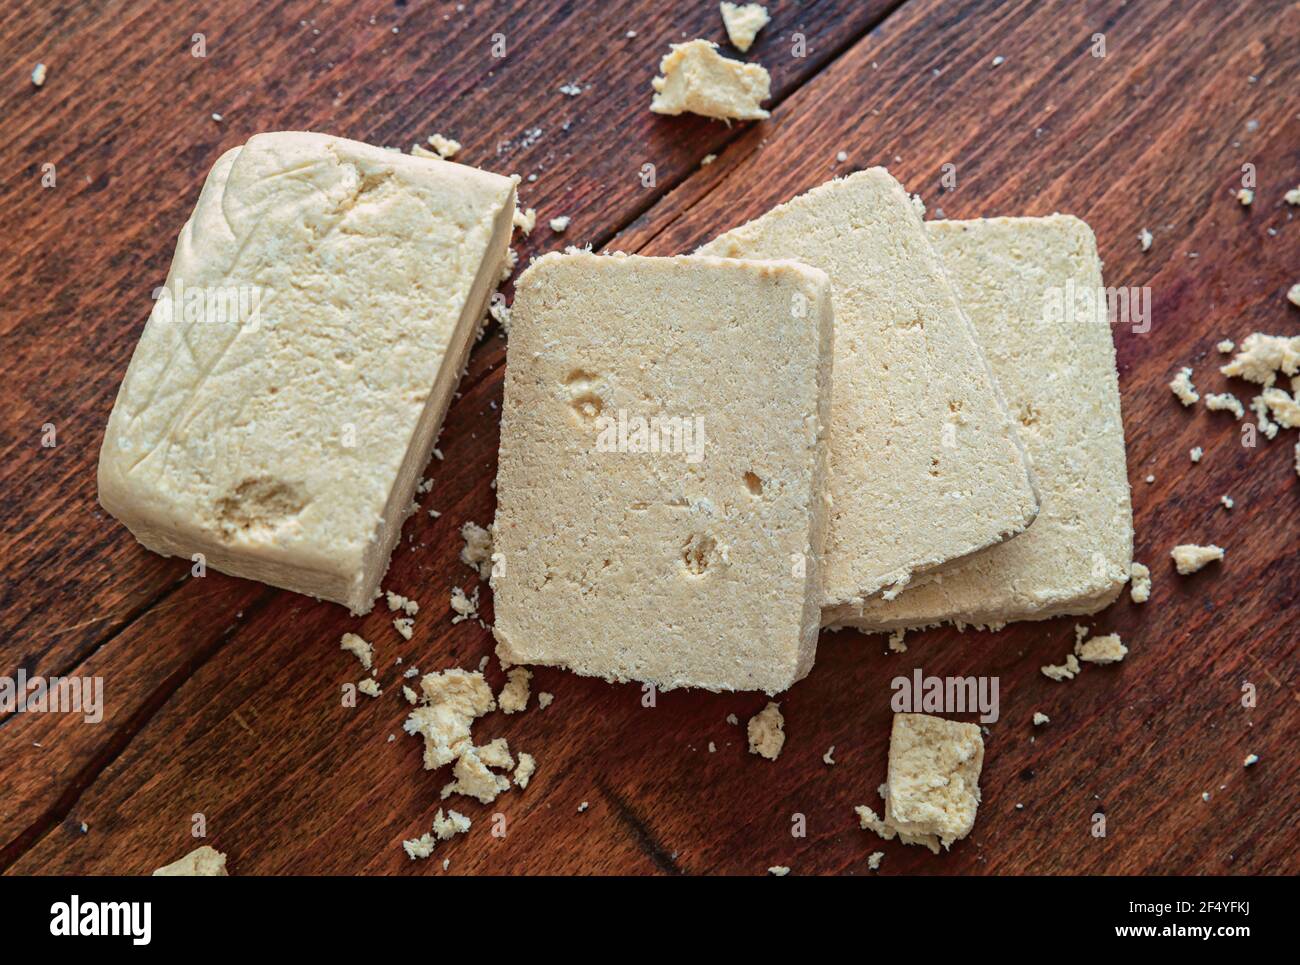 Halva sunflower seeds pieces on wooden table background, top view. Vanilla halvah or halwa, traditional dessert confection made also with sesame tahin Stock Photo